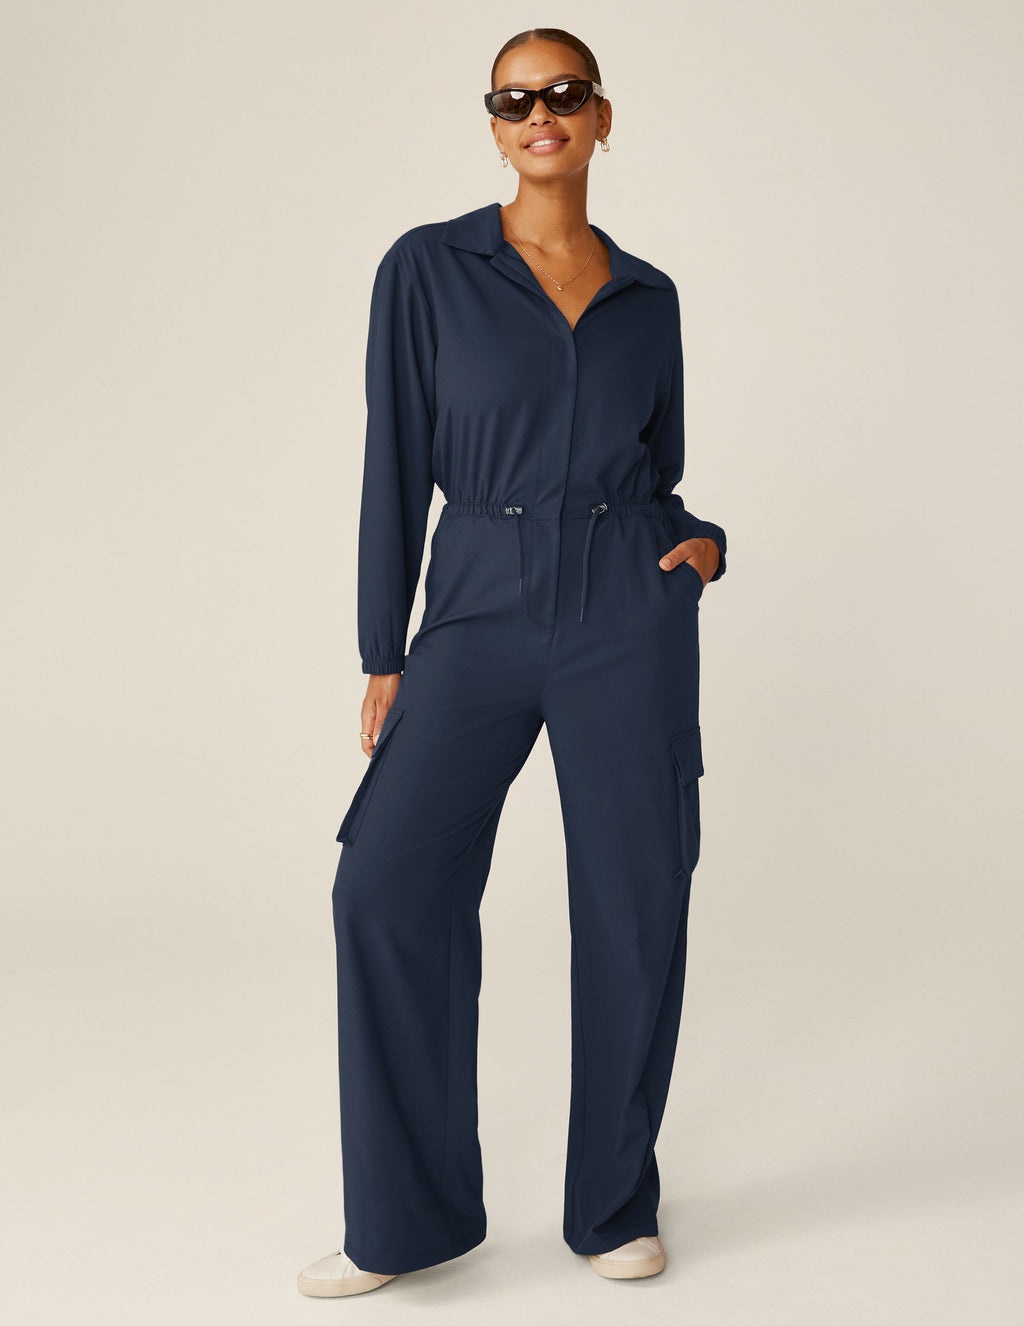 City Chic Jumpsuit Featured Image